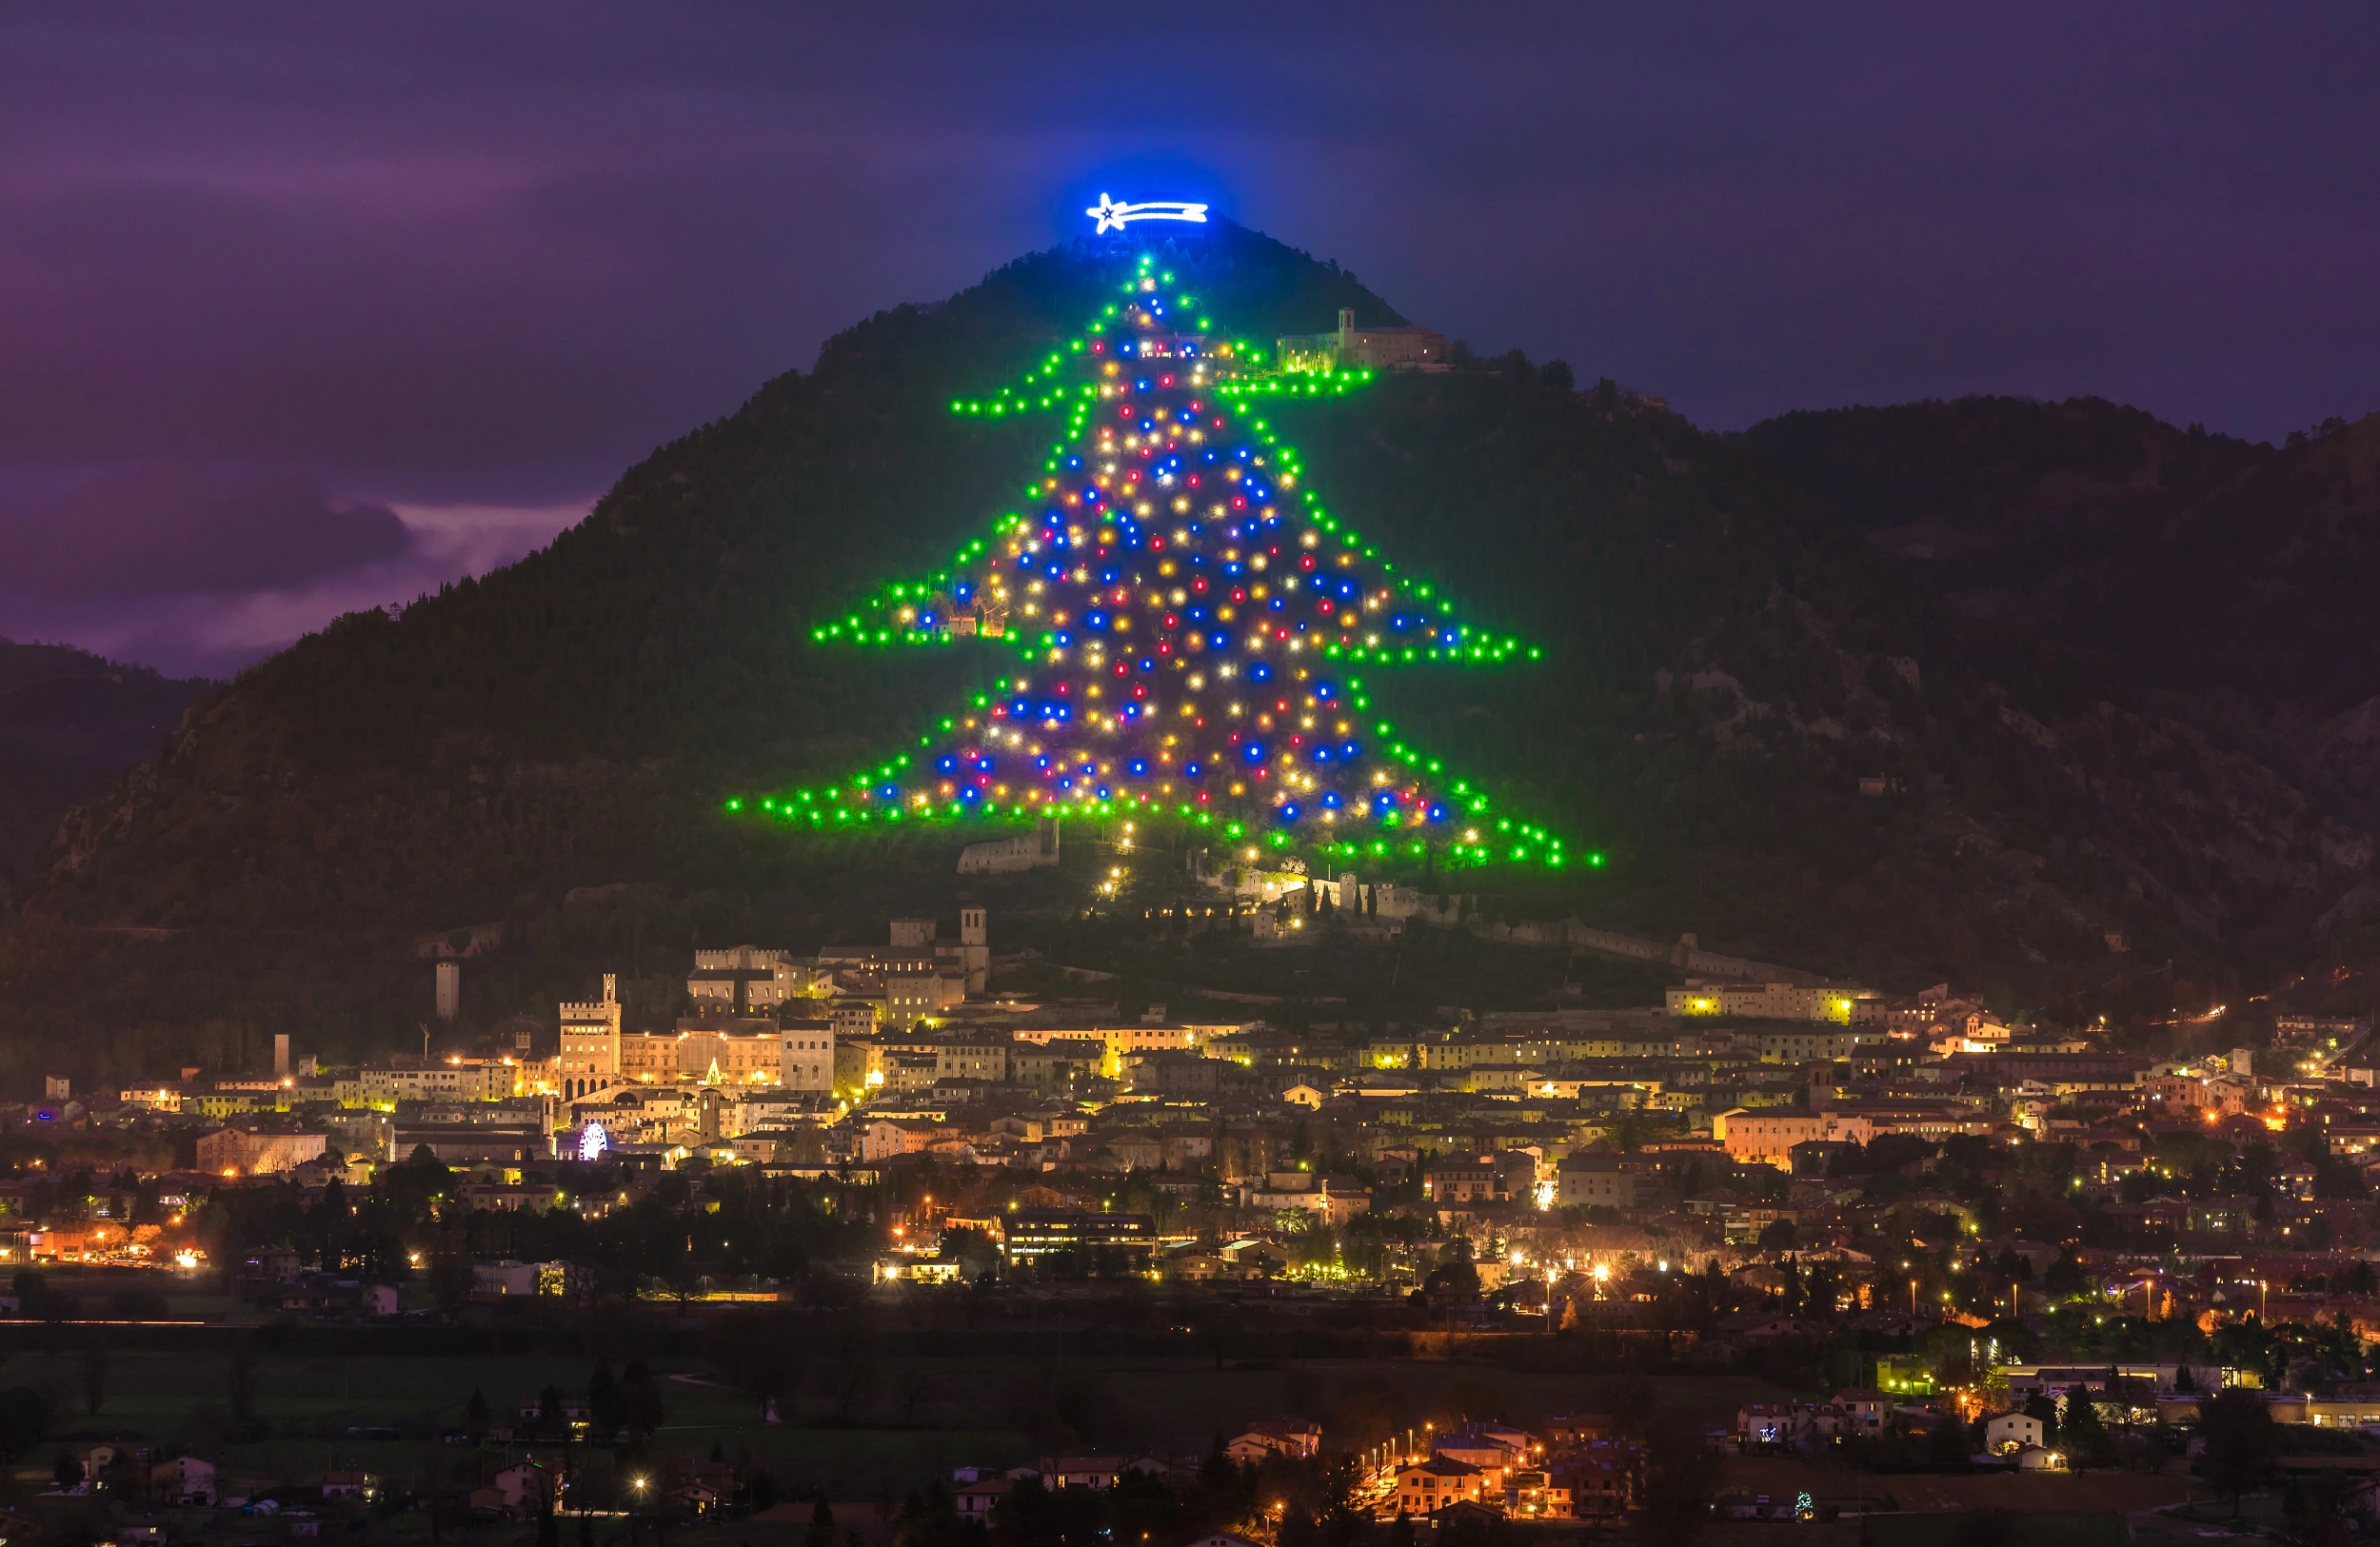 Gubbio Christmas Tree near Lake Trasimeno in the Umbria region of Italy. Very large Christmas tree made up of lights on the side of a hill